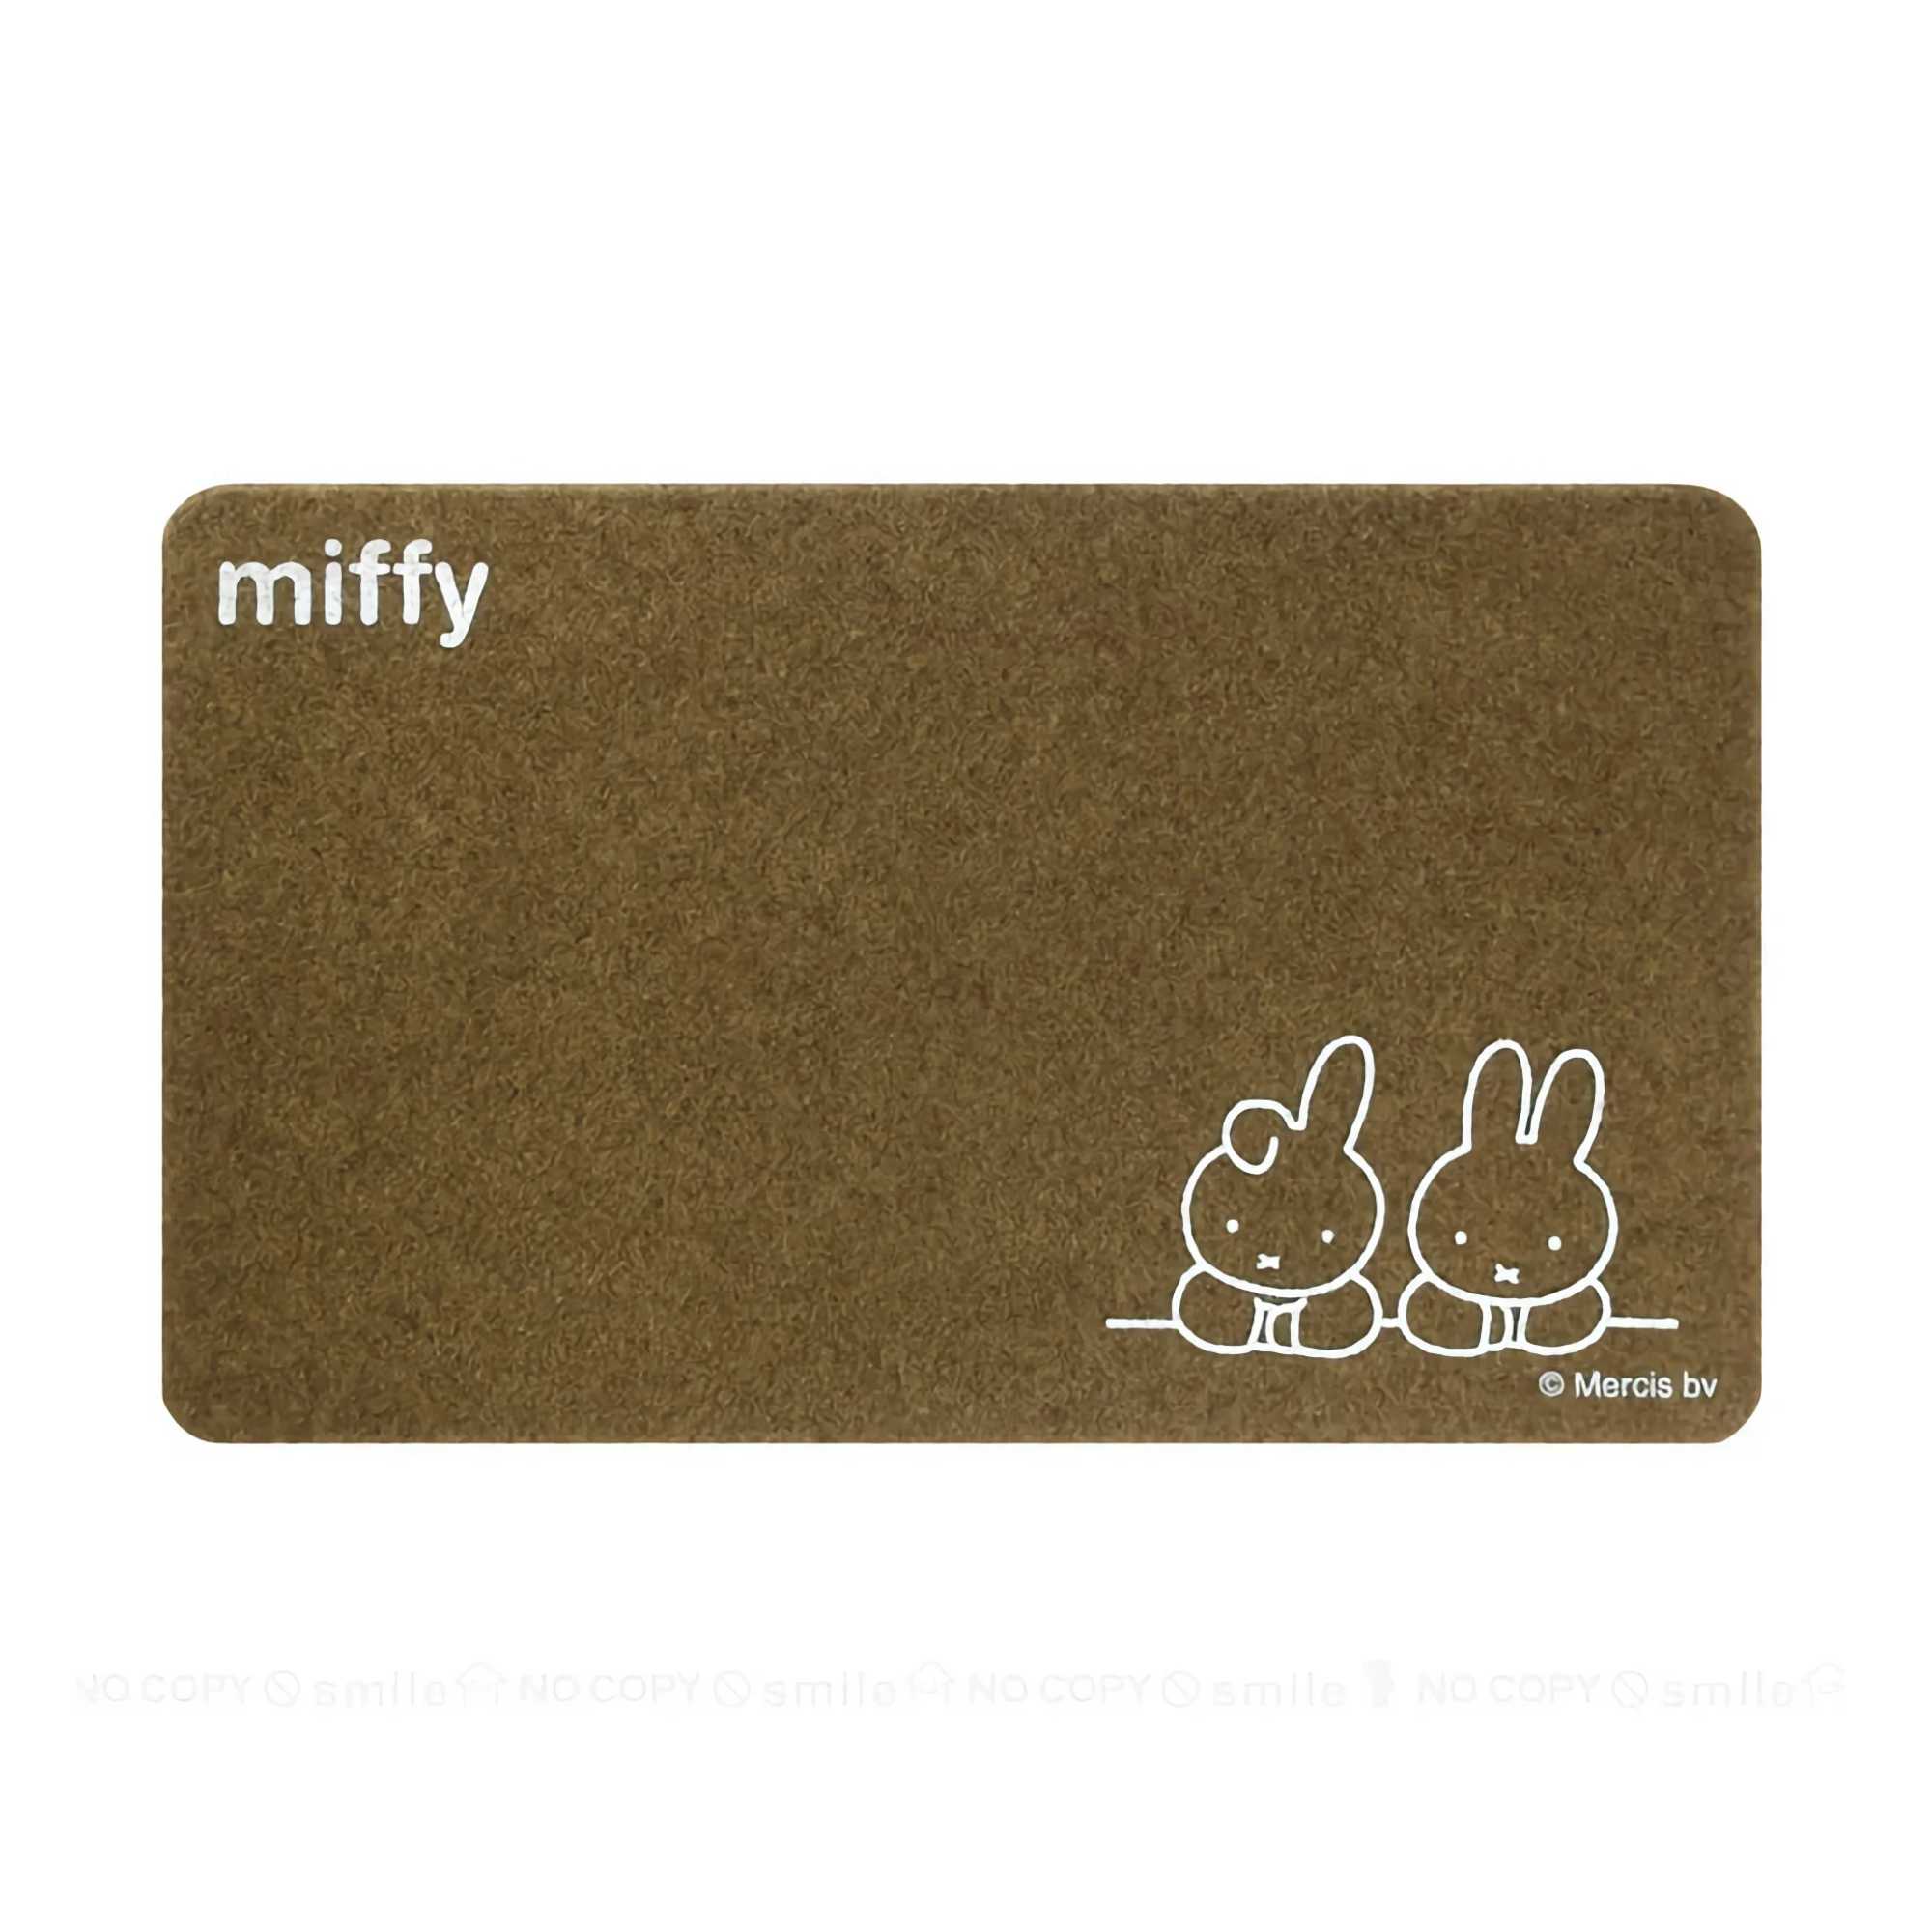 Miffy Entrance Mat , Miffy and Daan